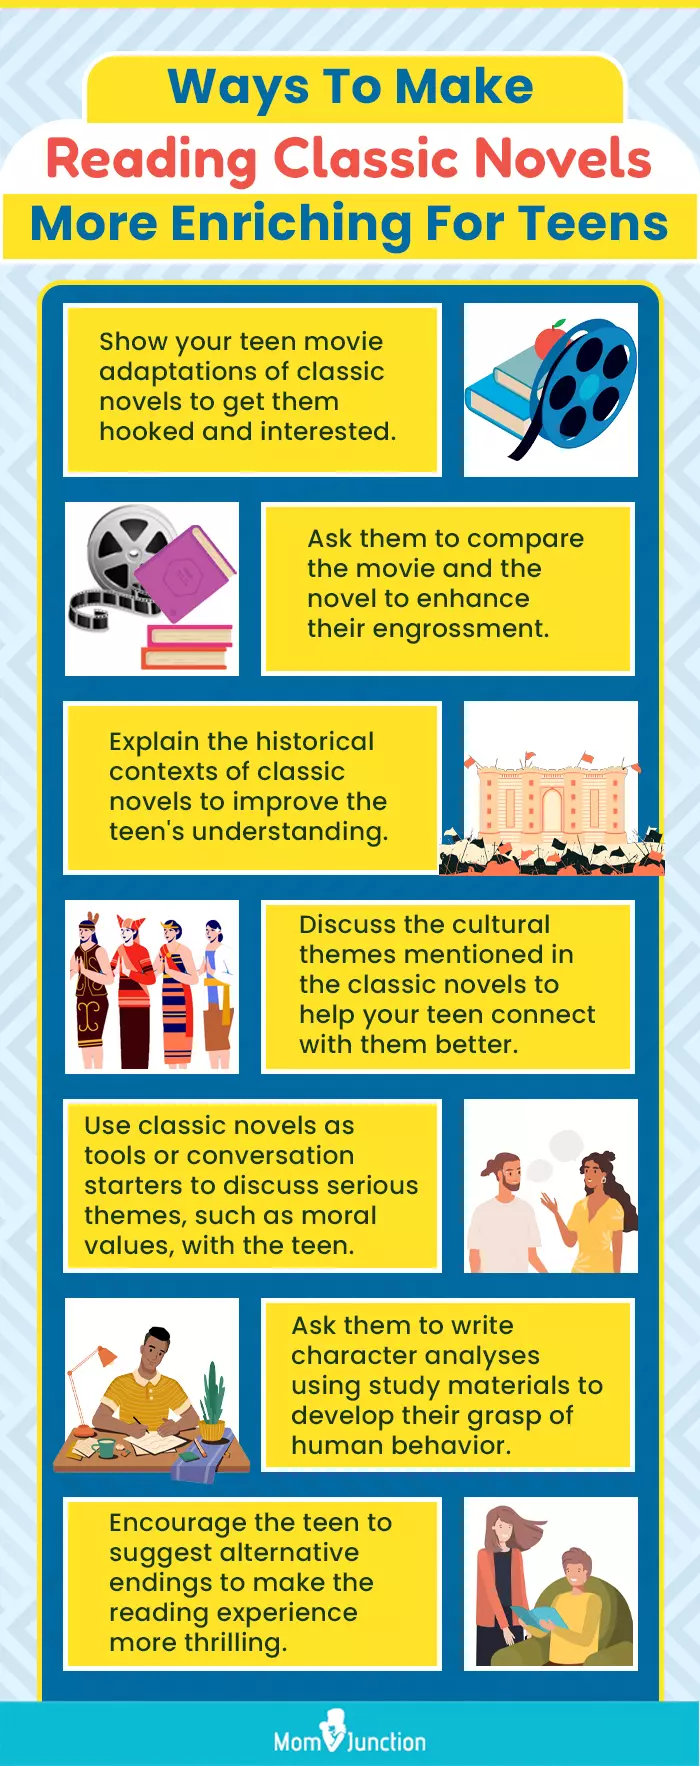 Ways To Make Reading Classic Novels More Enriching For Teens (infographic)